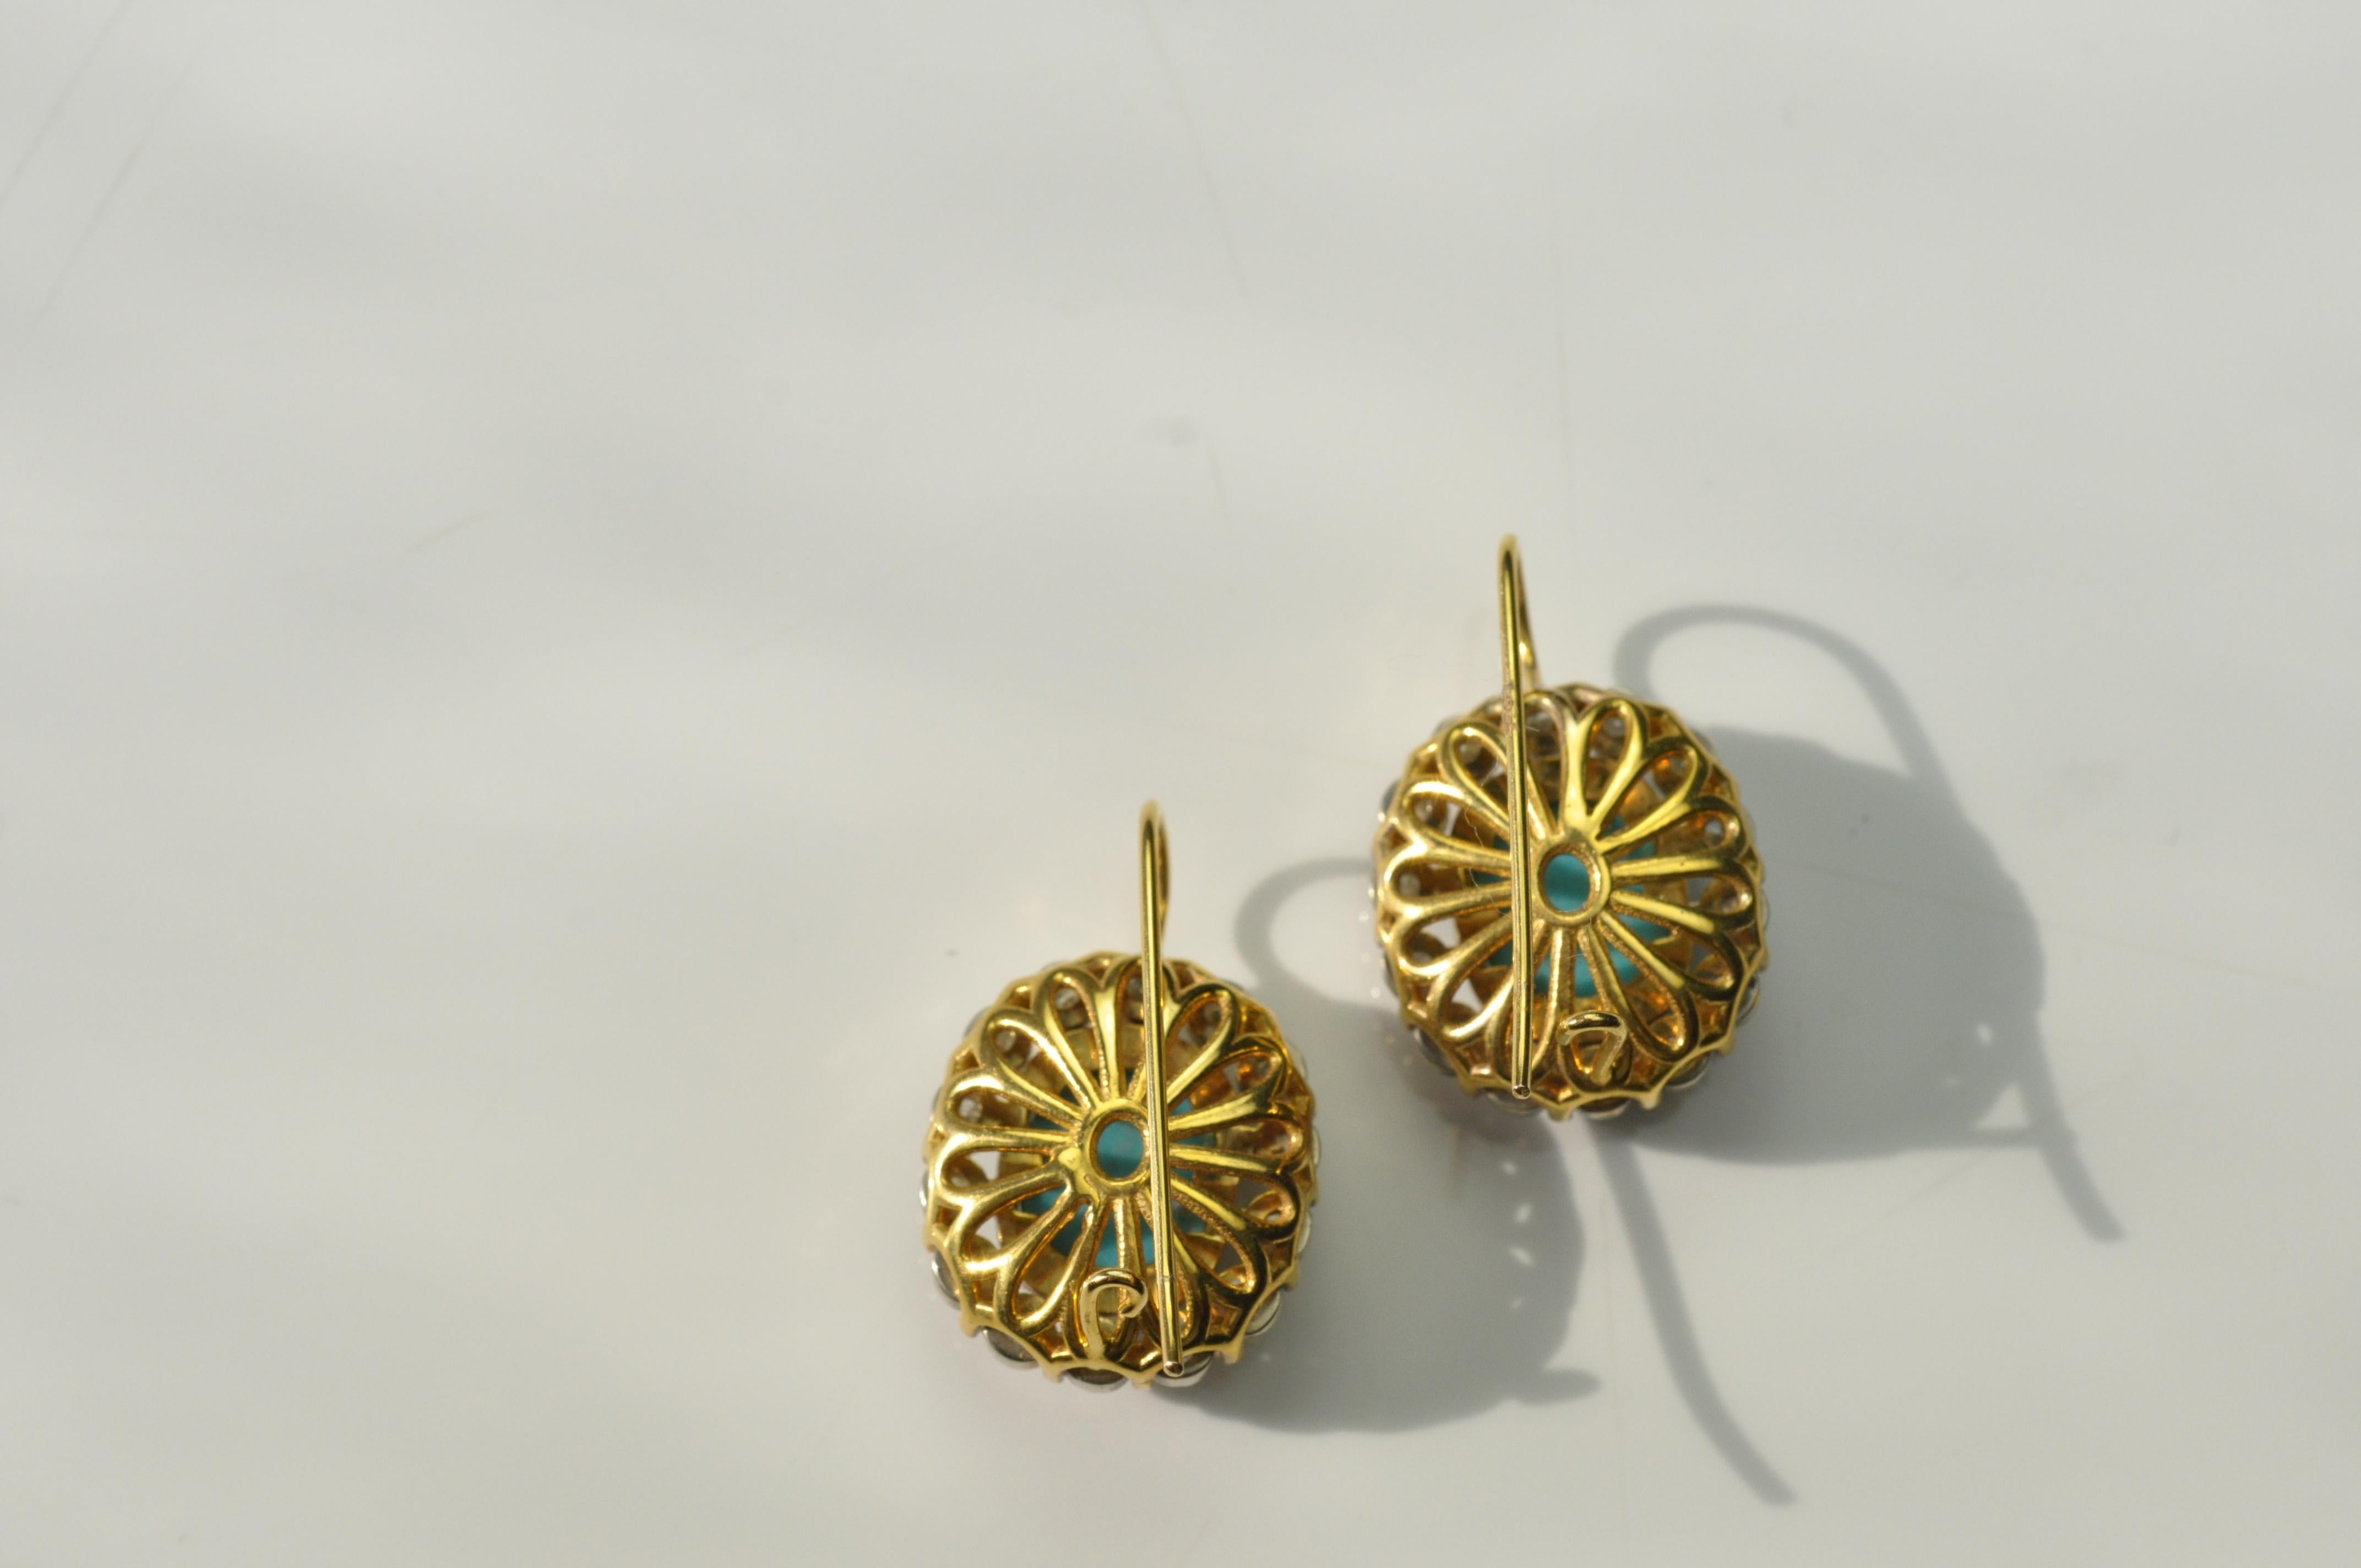 Earrings - Sleeping Beauty Turquoise 5.07cts from Arizona mines, set in 18K Yellow Gold & White Gold. 0.72cts Diamonds. Back detailing with Gallery.  Secure hook closure on Ear wire . Handmade in LA. Hand Miligrain details and mixing colors of gold